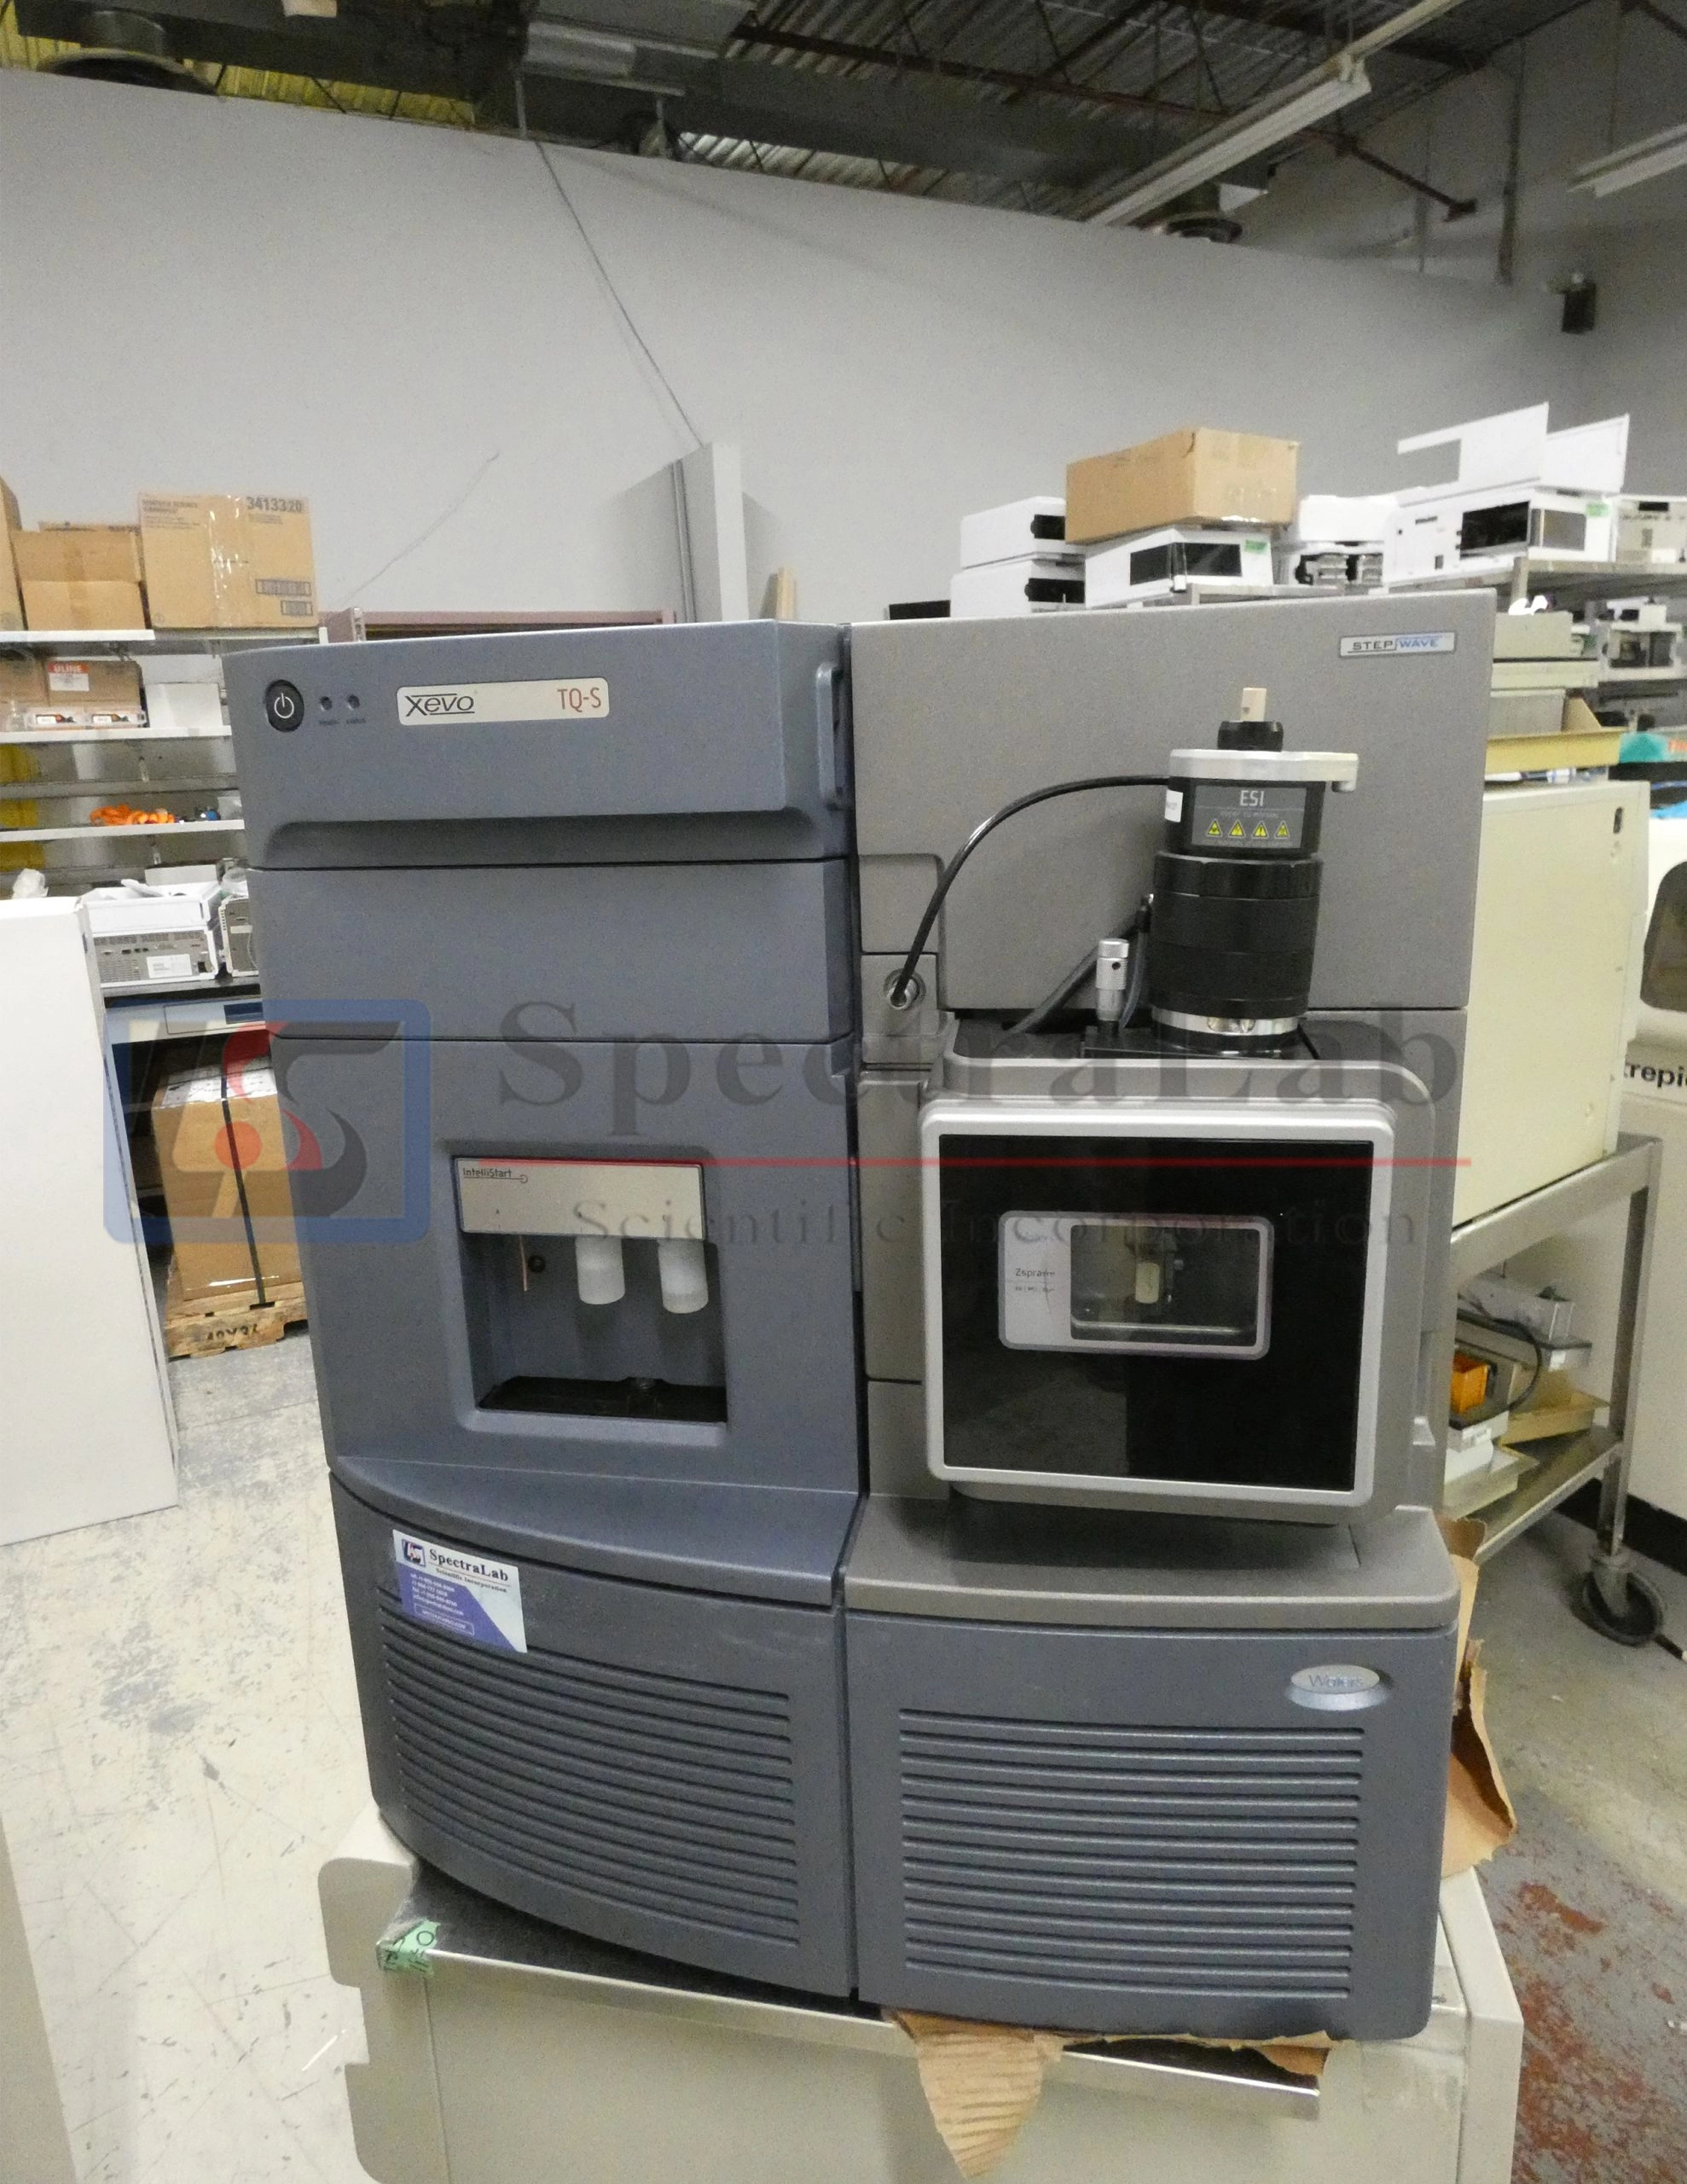 Waters Xevo TQ-S LC-MS/MS with Acquity UPLC